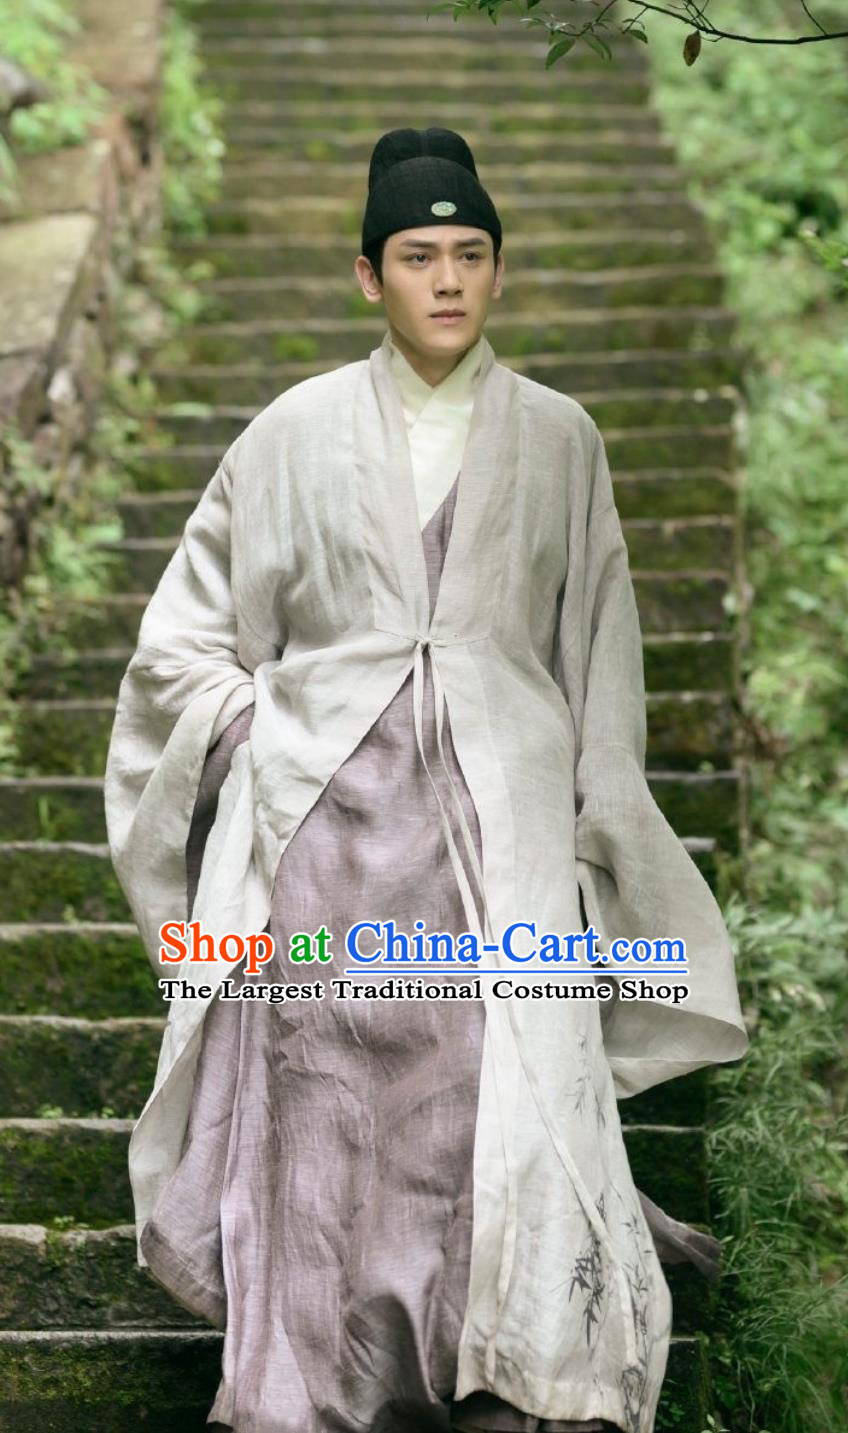 China Ancient Hanfu Clothing TV Series Song of Youth Childe Sun Shi Jie Robes Ming Dynasty Scholar Garment Costumes